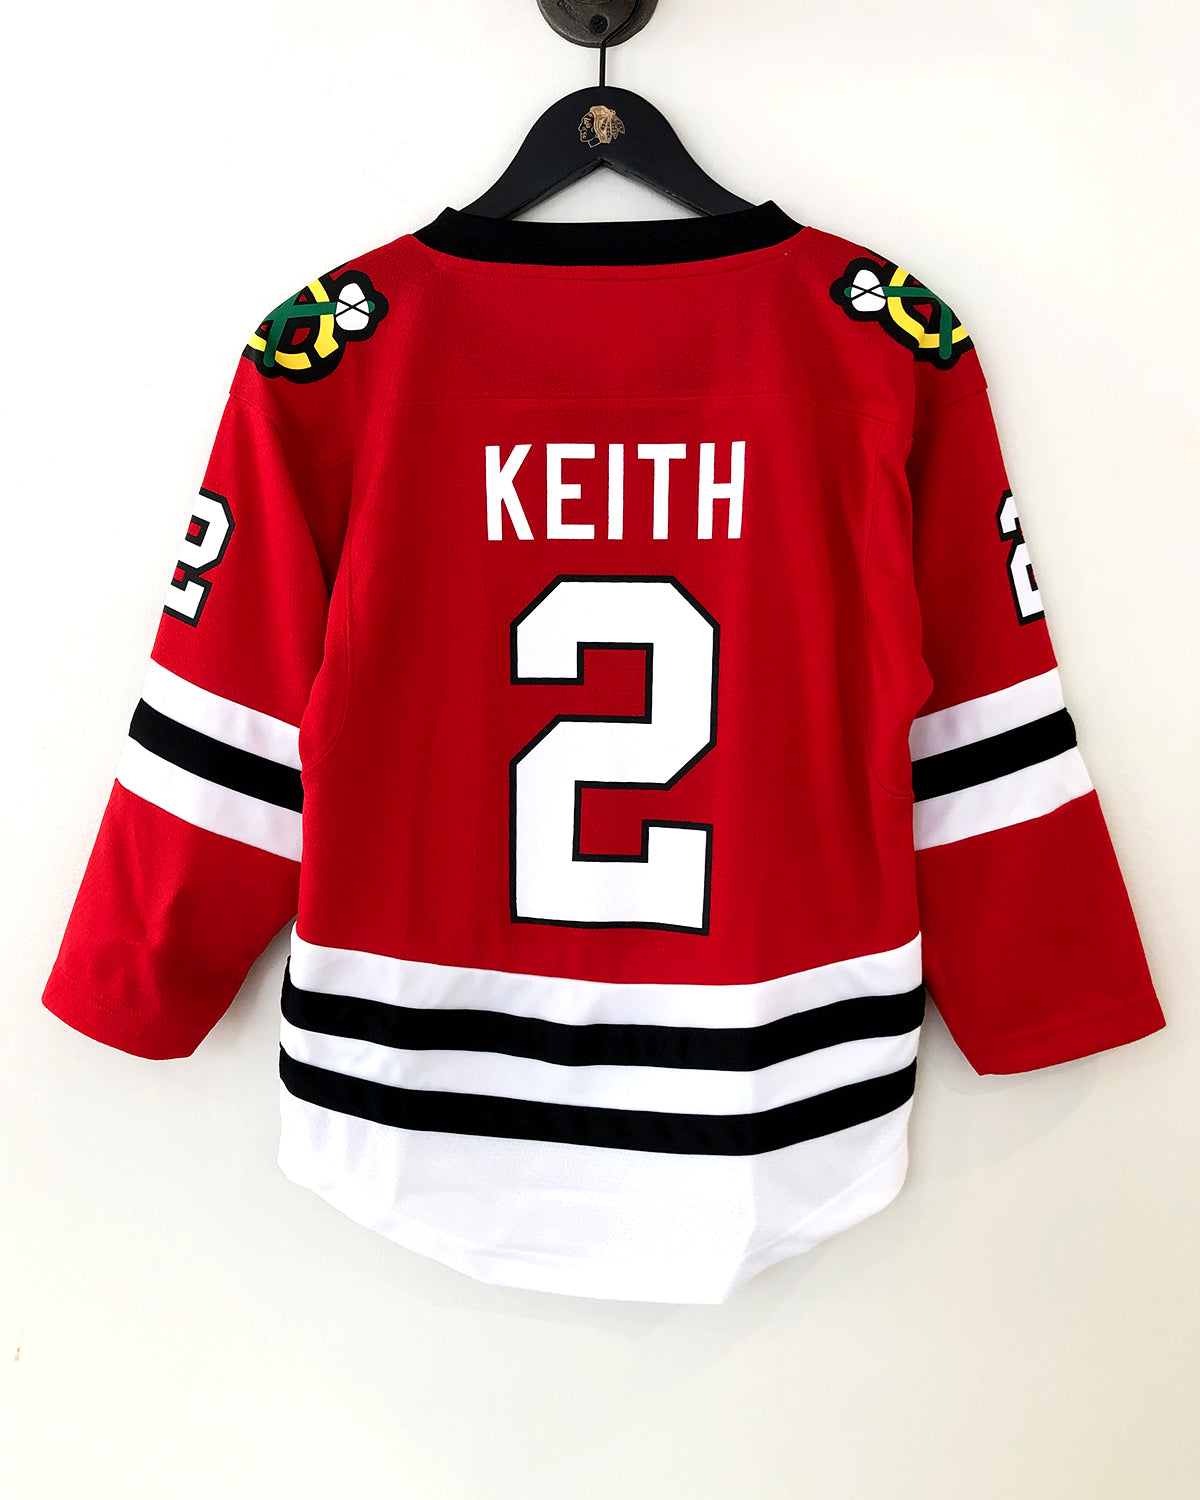 keith jersey